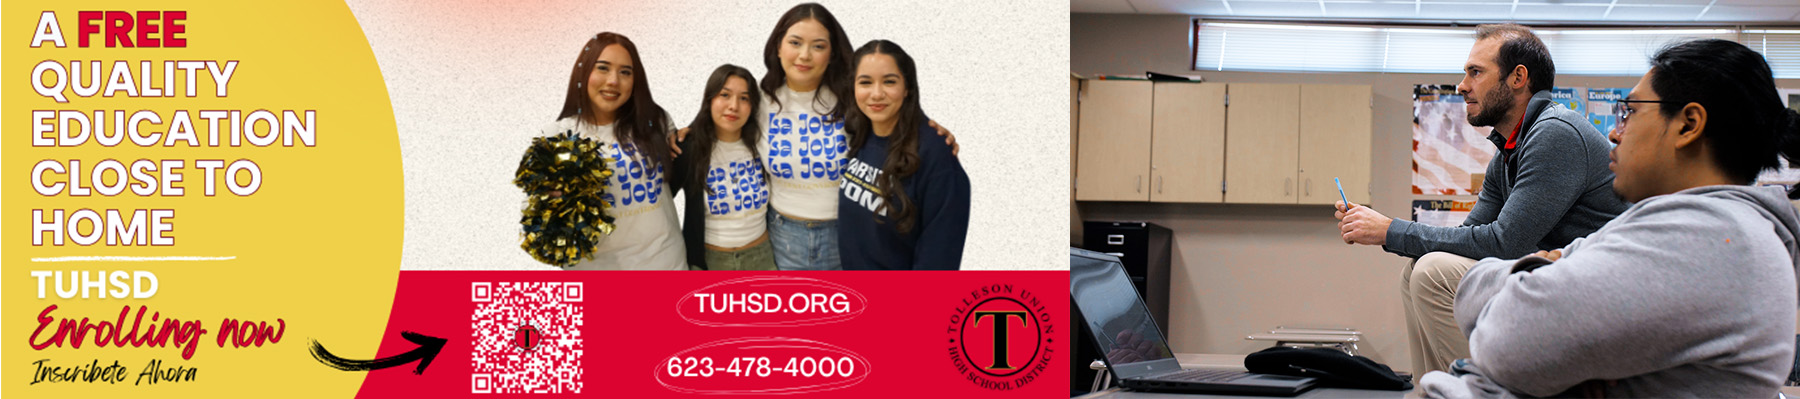 SUPPORT OUR SCHOOLS WITH A TAX CREDIT DONATION! Single person donation of $200 or married joint filing donation of $400 Remember TUHSD when you're filing your taxes! | Two students sitting in classroom